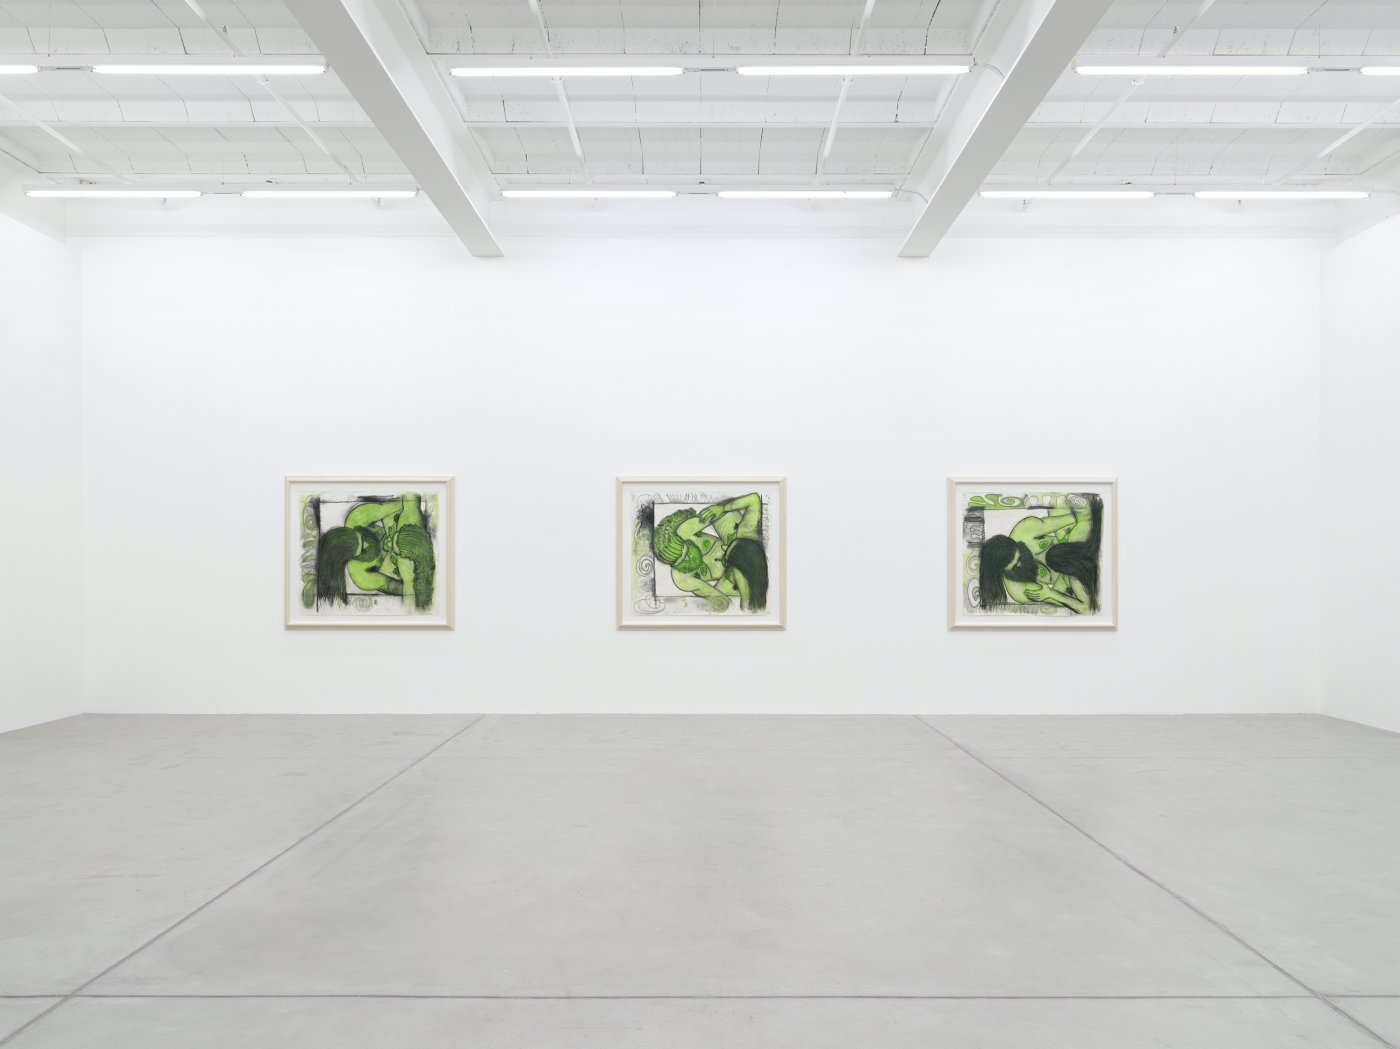 Installation image for Carroll Dunham: Qualiascope Paintings and Related Drawings, at Galerie Eva Presenhuber